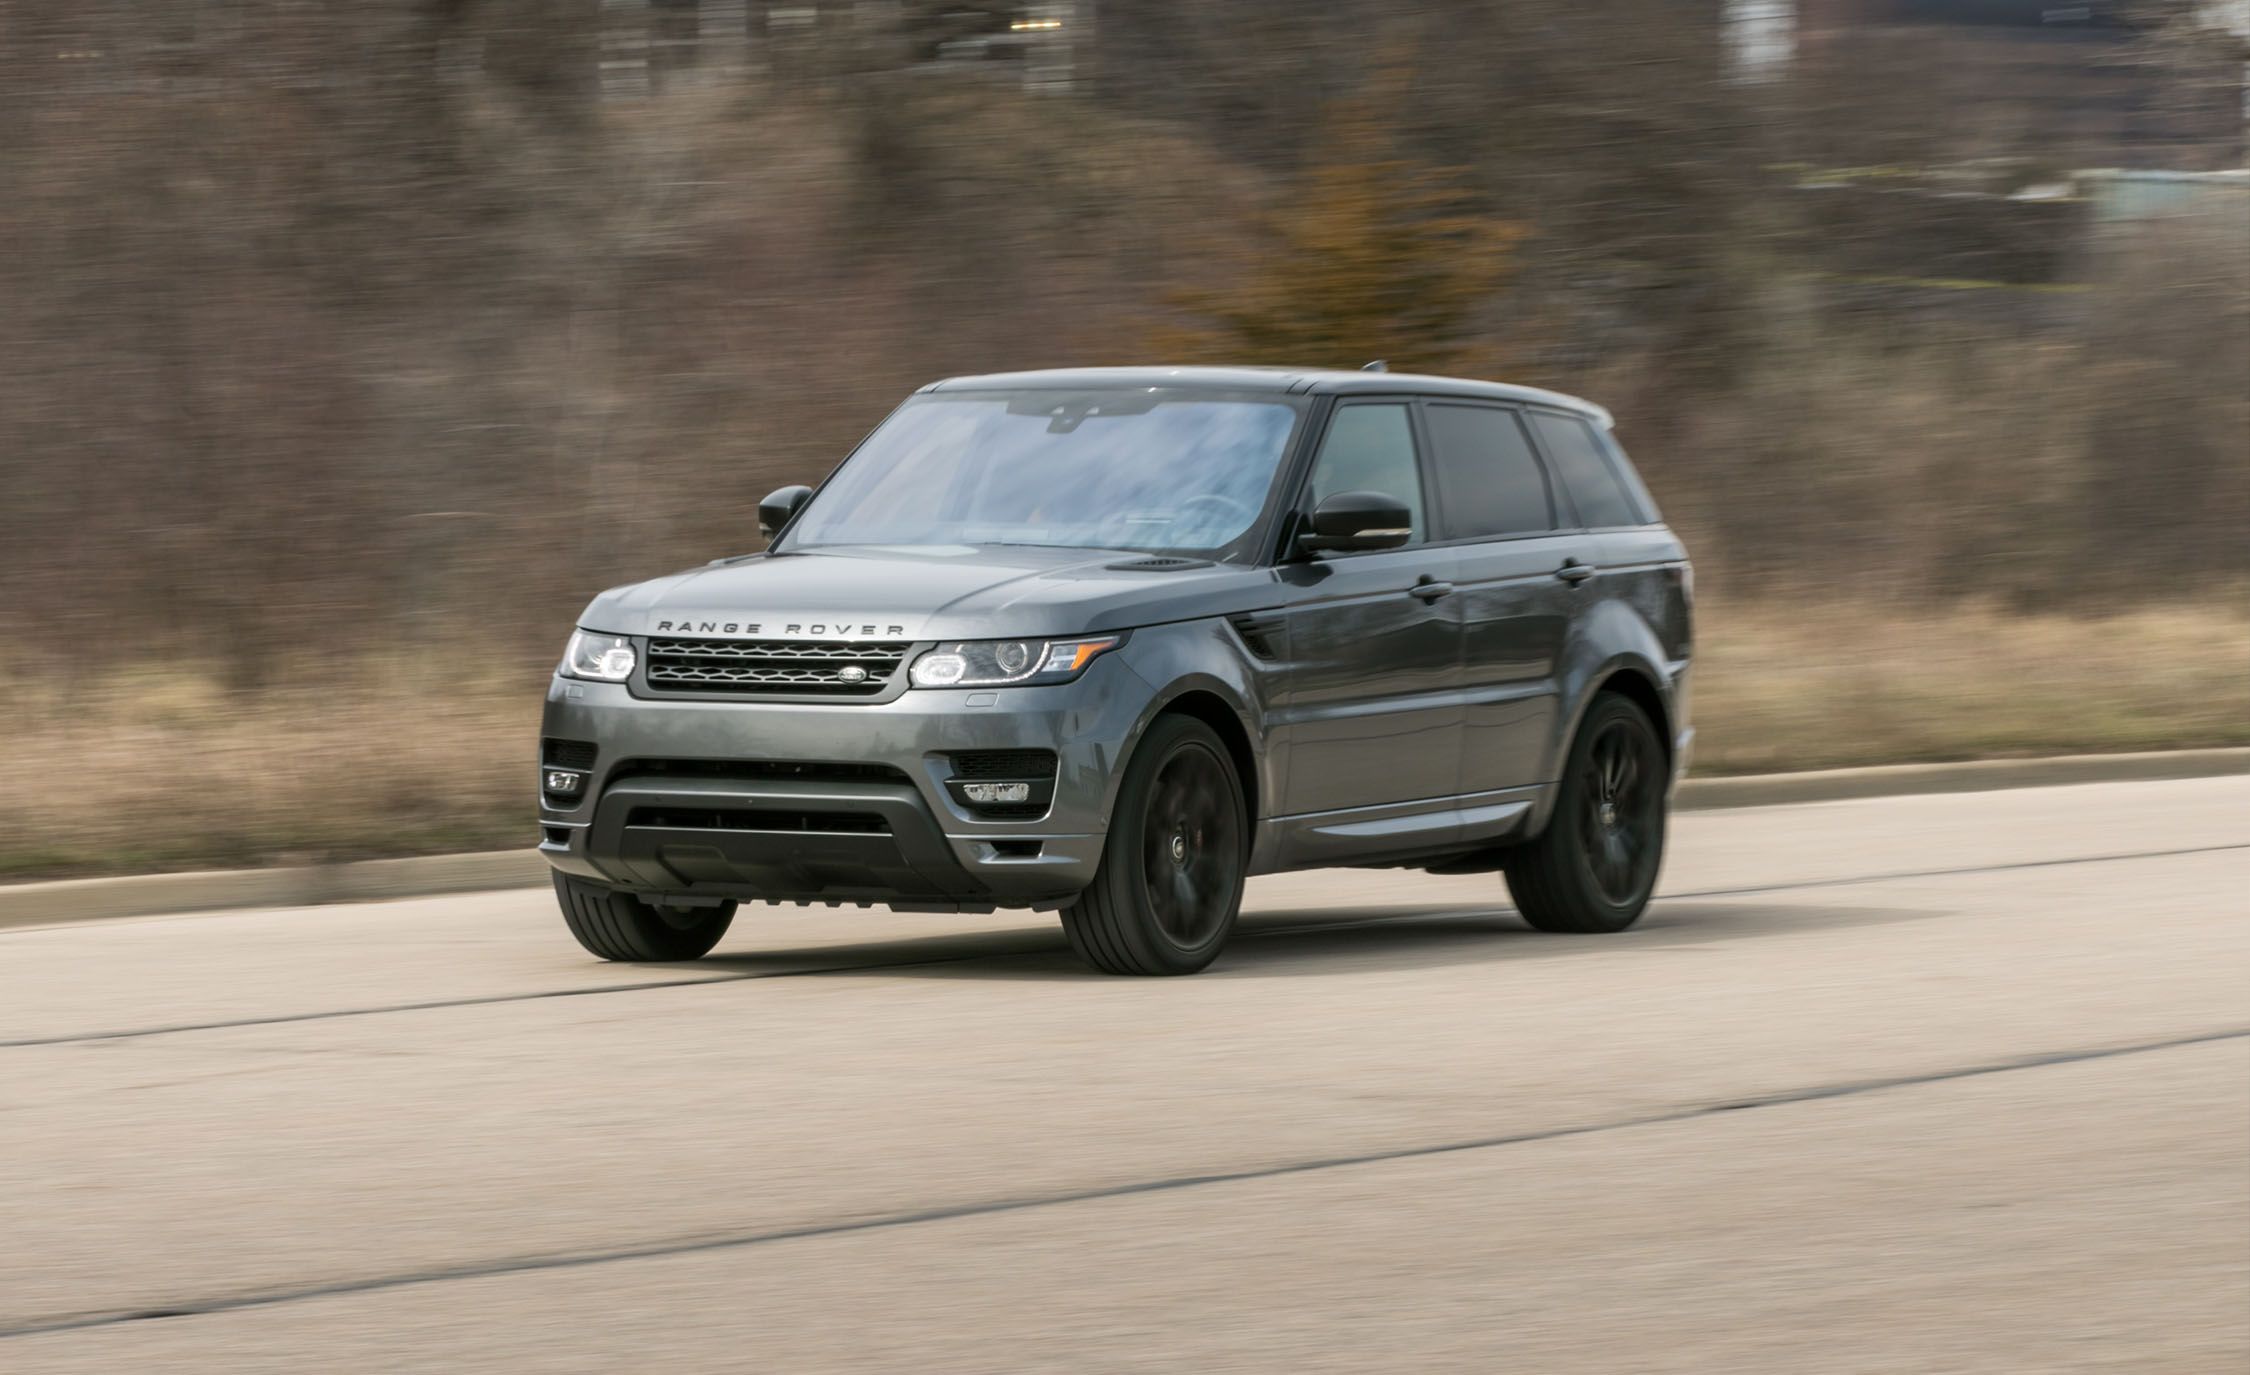 2017 Range Rover Sport Supercharged V 8 Test Review Car And Driver